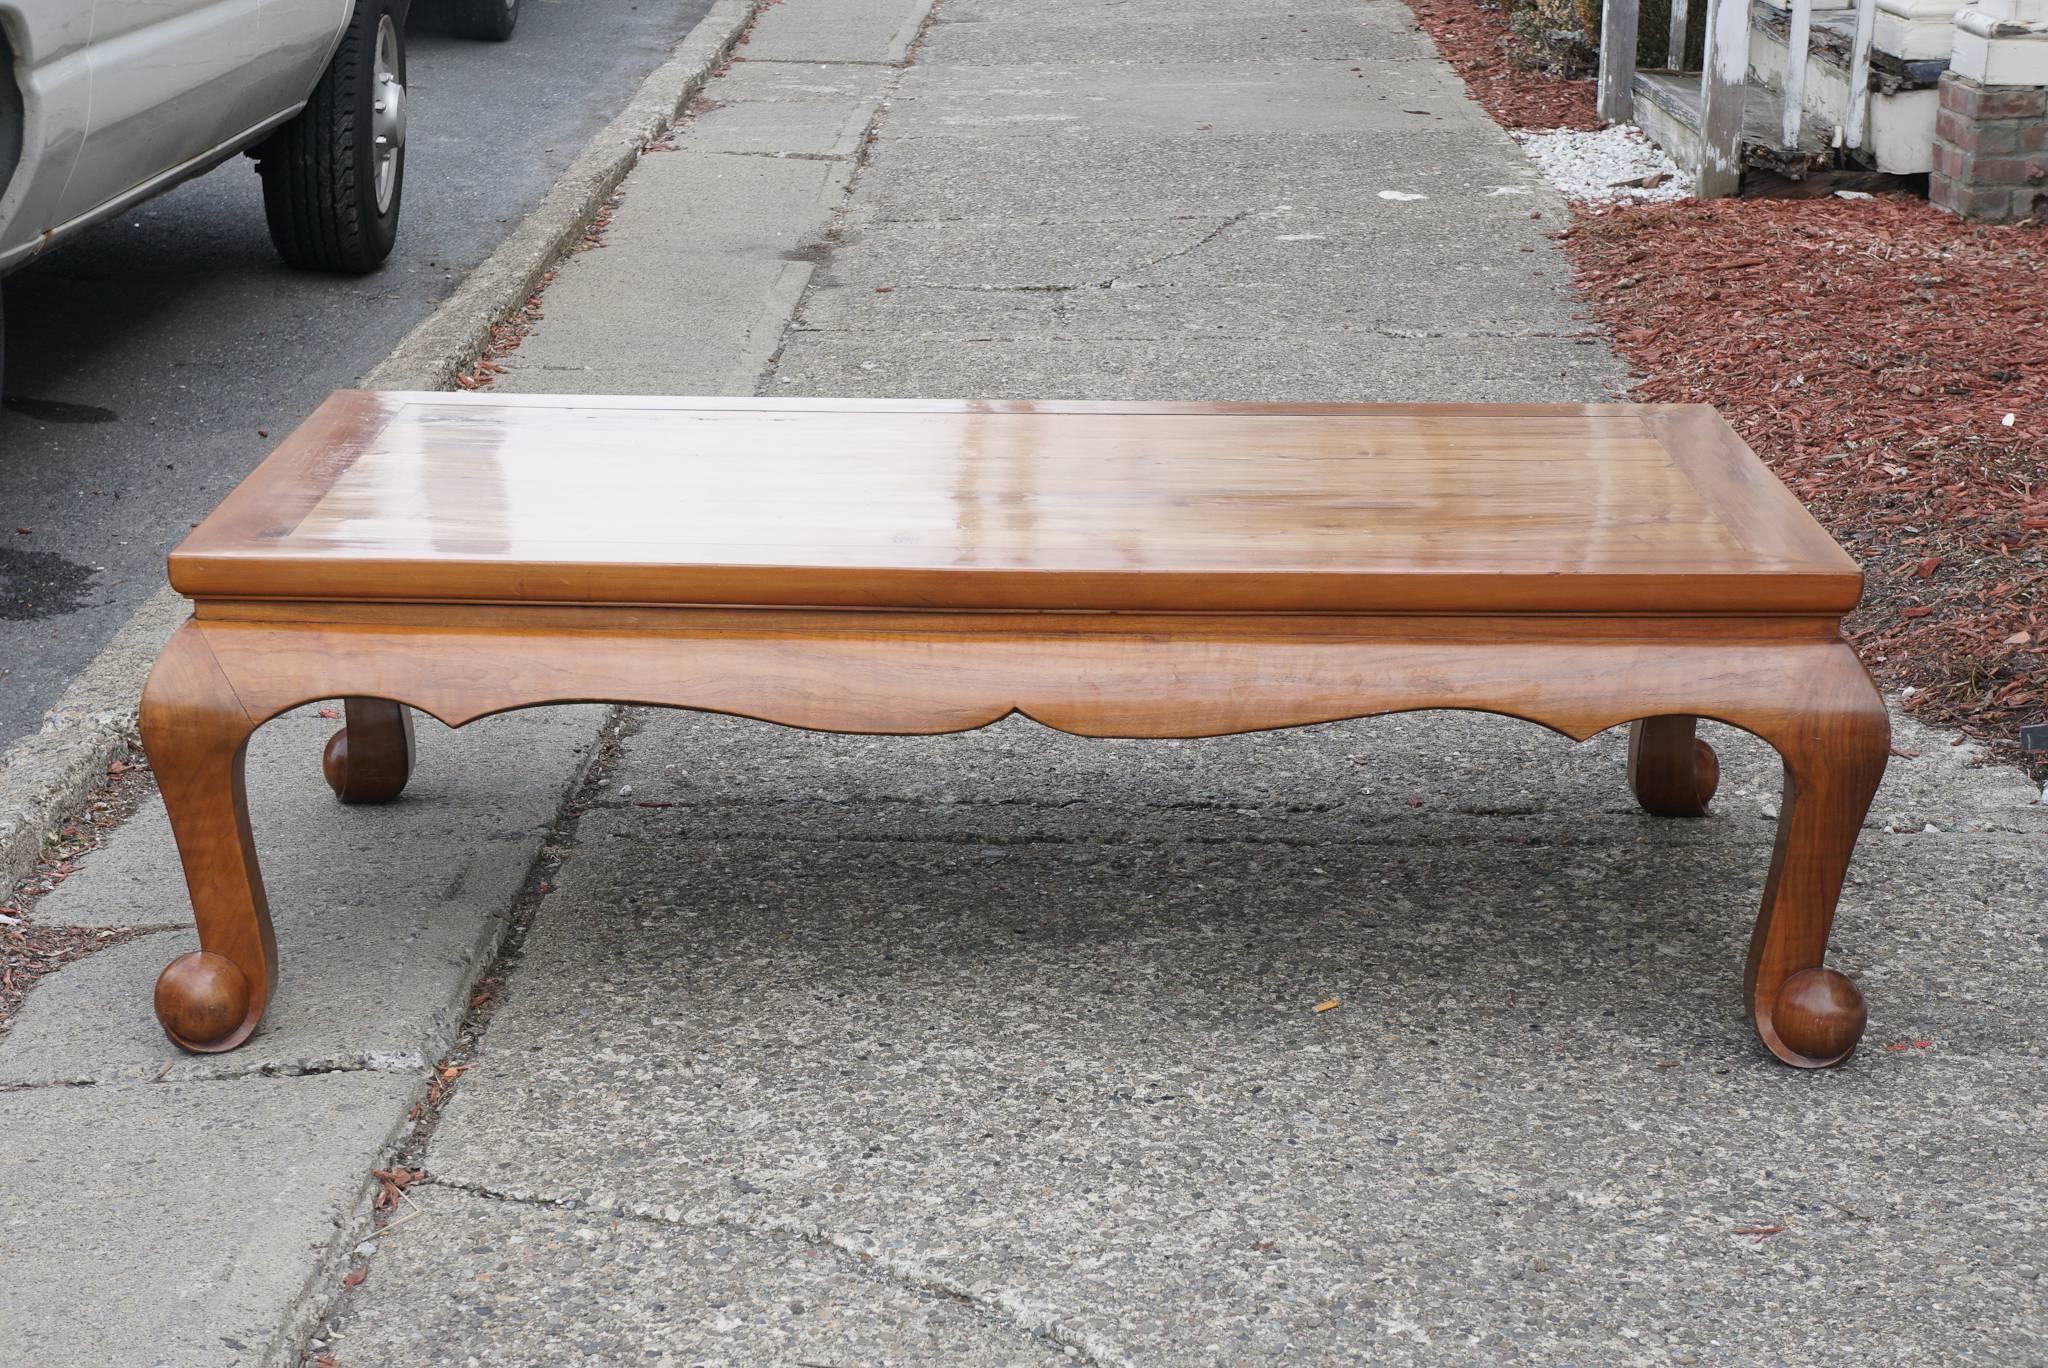 This piece made in China, circa 1900 would have been made as a bed or low platform. Usable now and with a new finish as a large coffee table the piece is a perfect example of the needs of the modern world looking to the past for direction. The legs